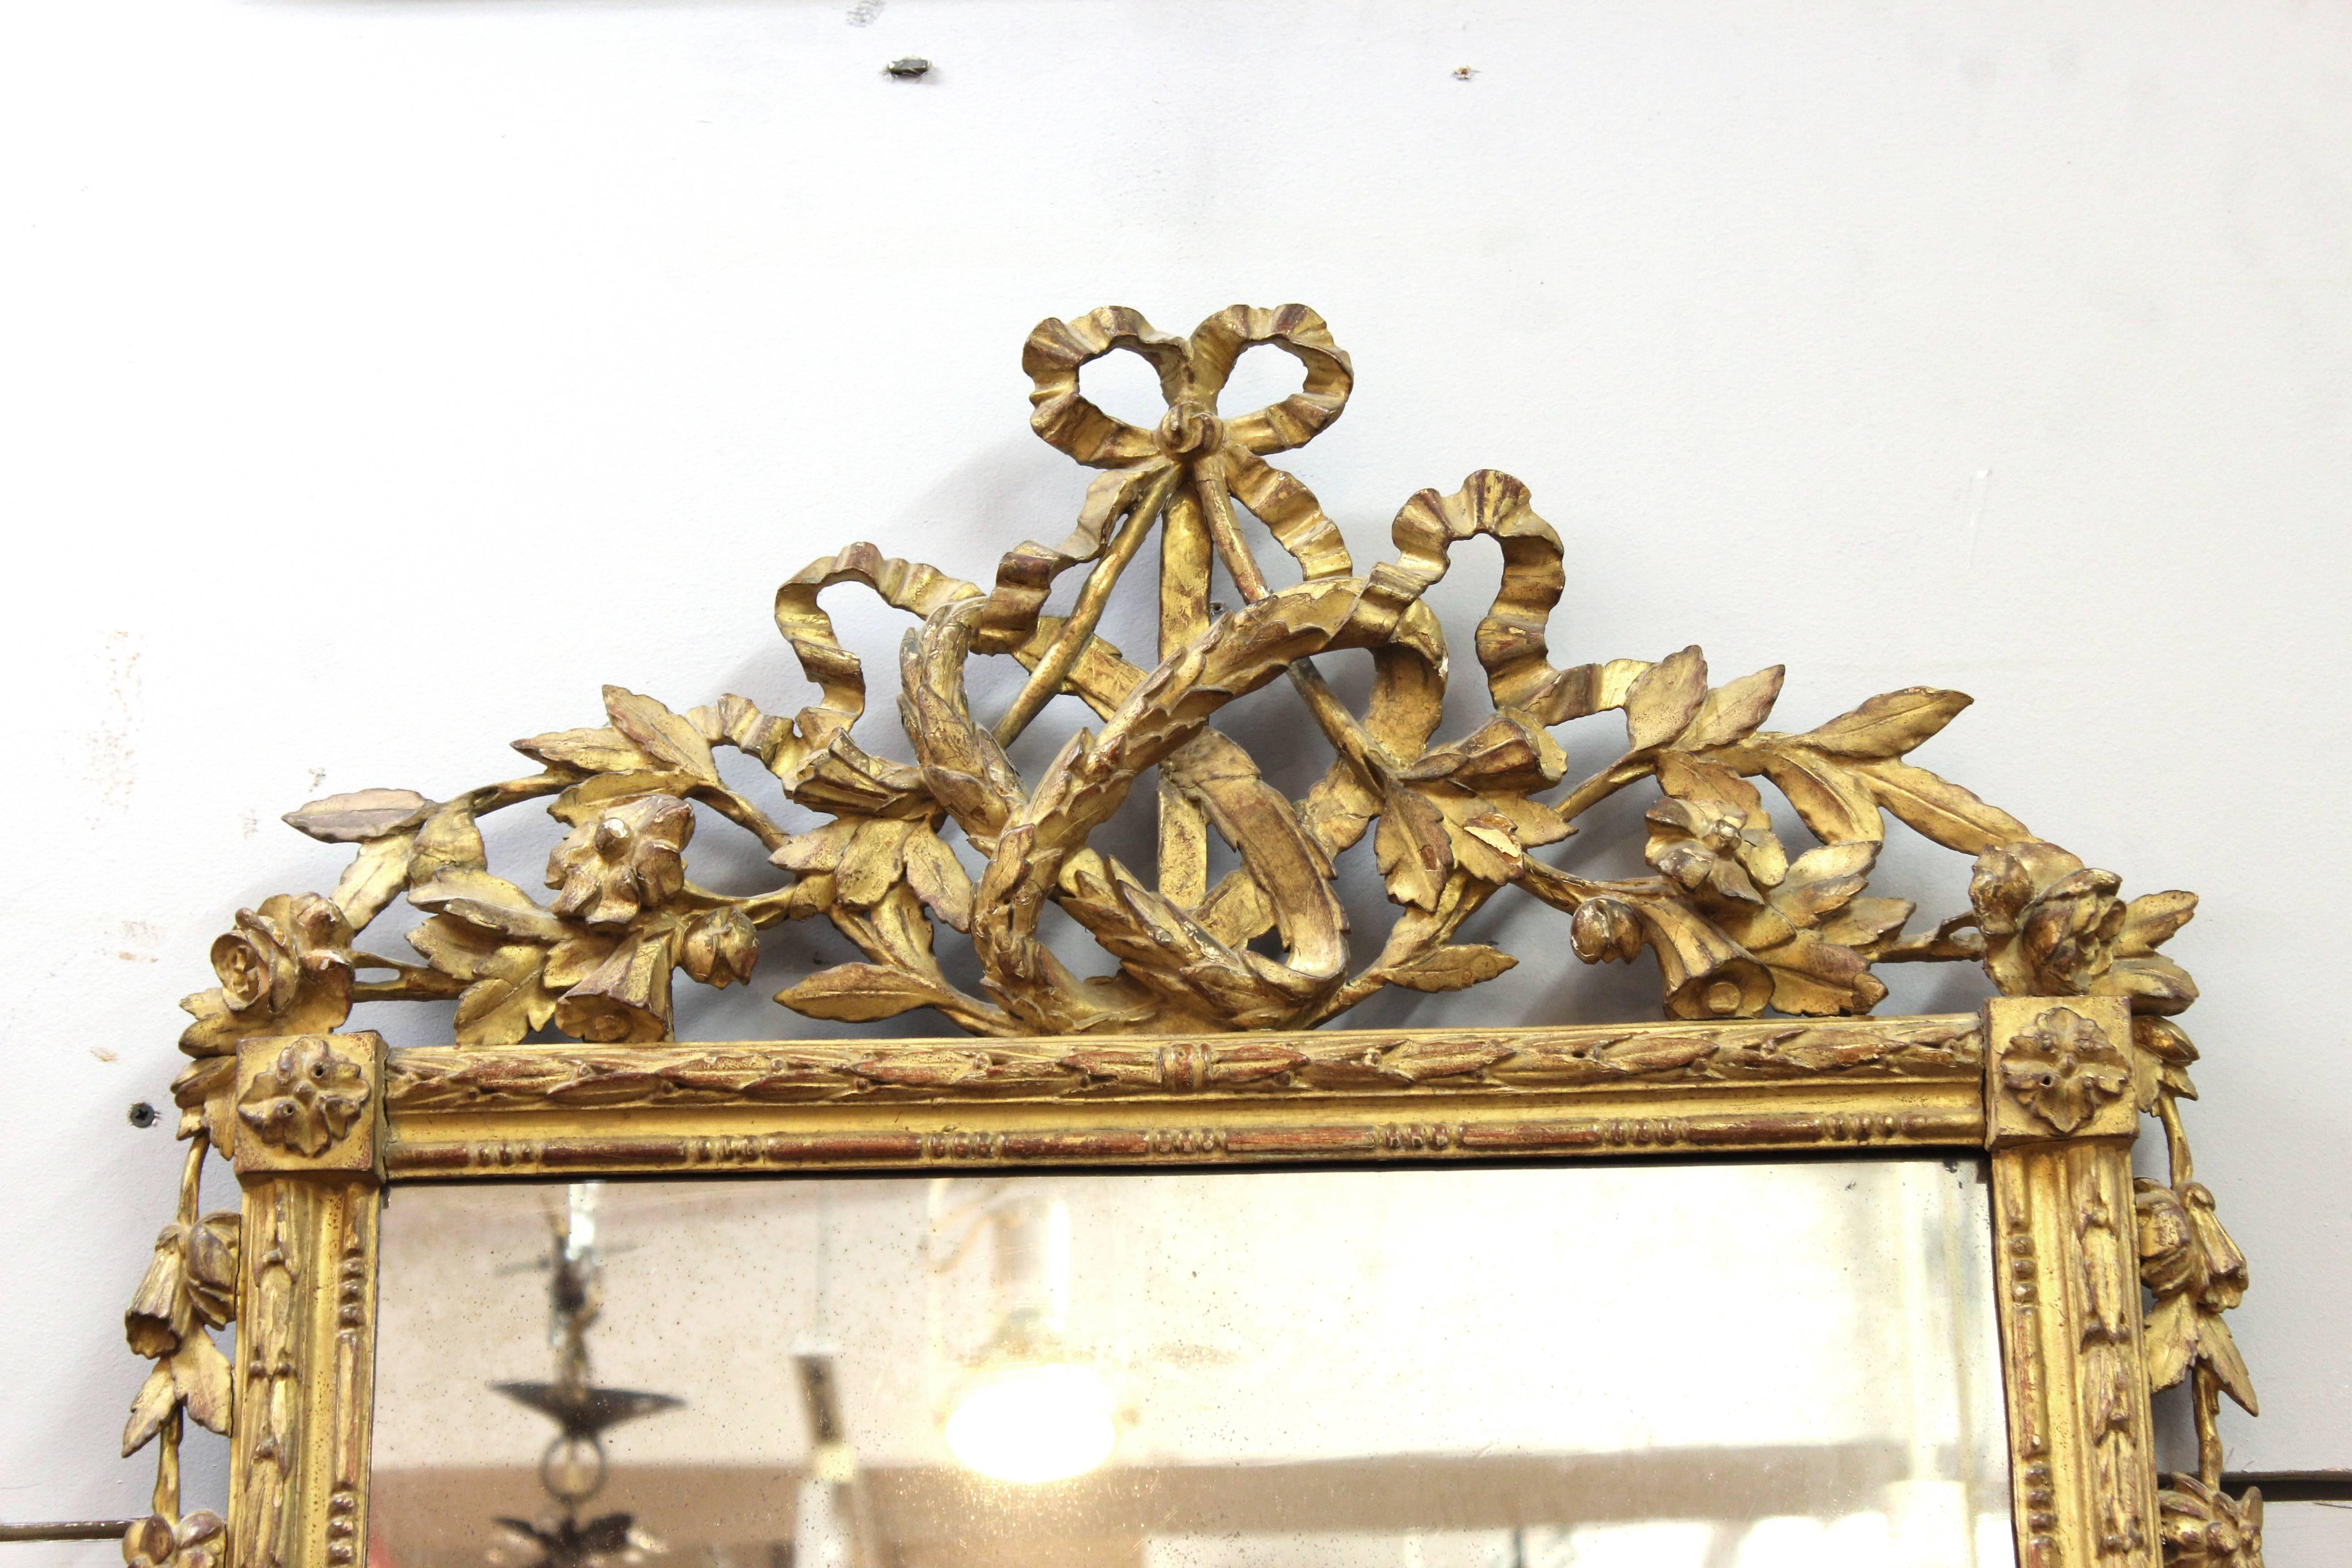 A Louis XVI or Marie Antoinette style mirror. The mirror is made up of two panels which are placed in a giltwood frame. The wooden frame is styled with garlands of flowers and ribbons. Wear appropriate to age and use including minor losses to the